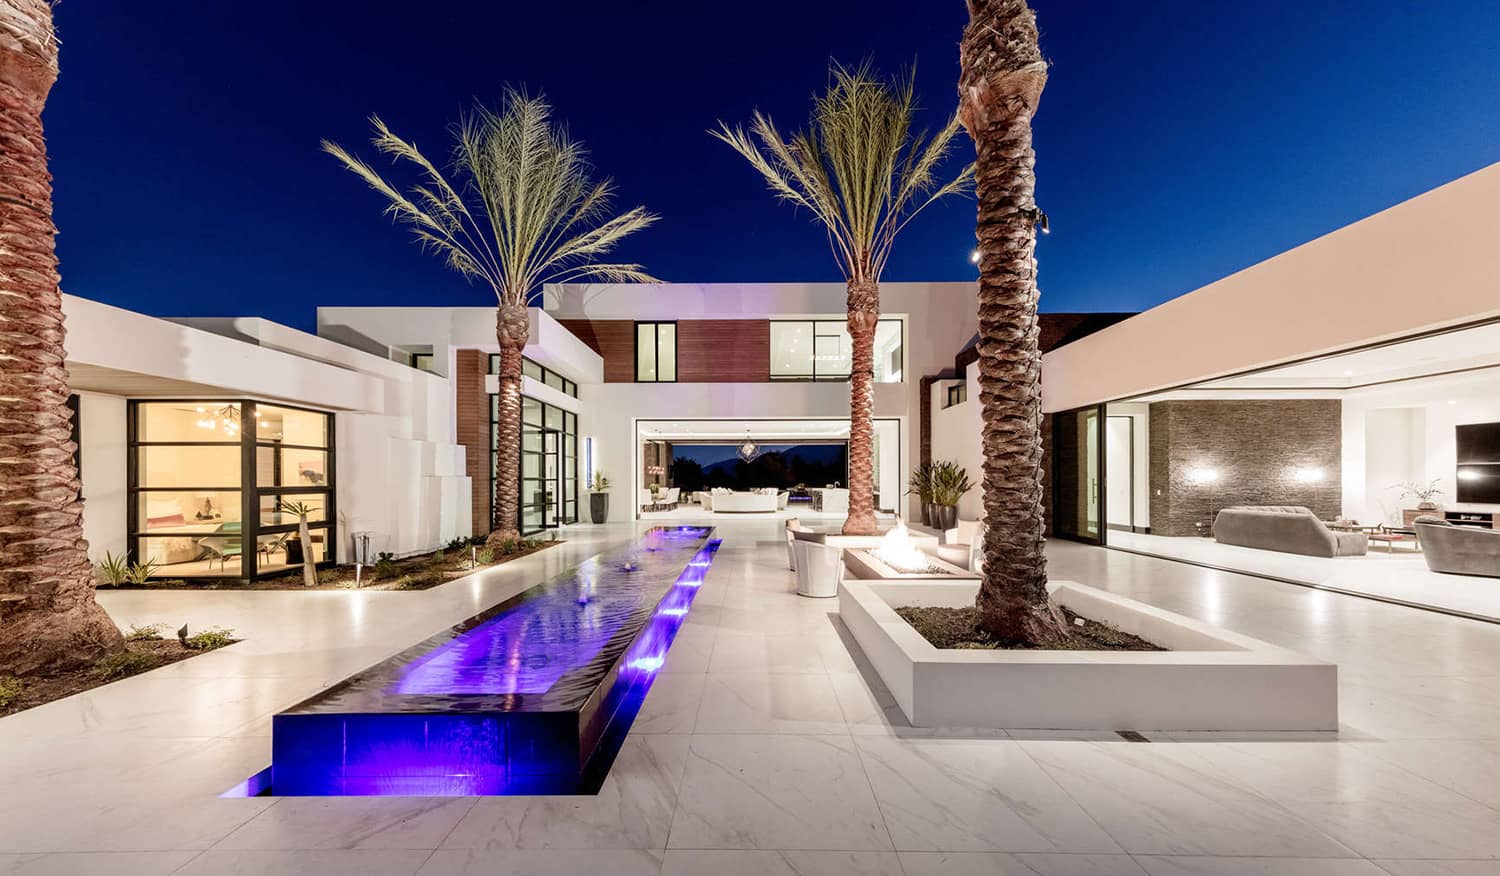 Chang-Residence-in-Palm-Springs-California-by-South-Coast-Architects-3